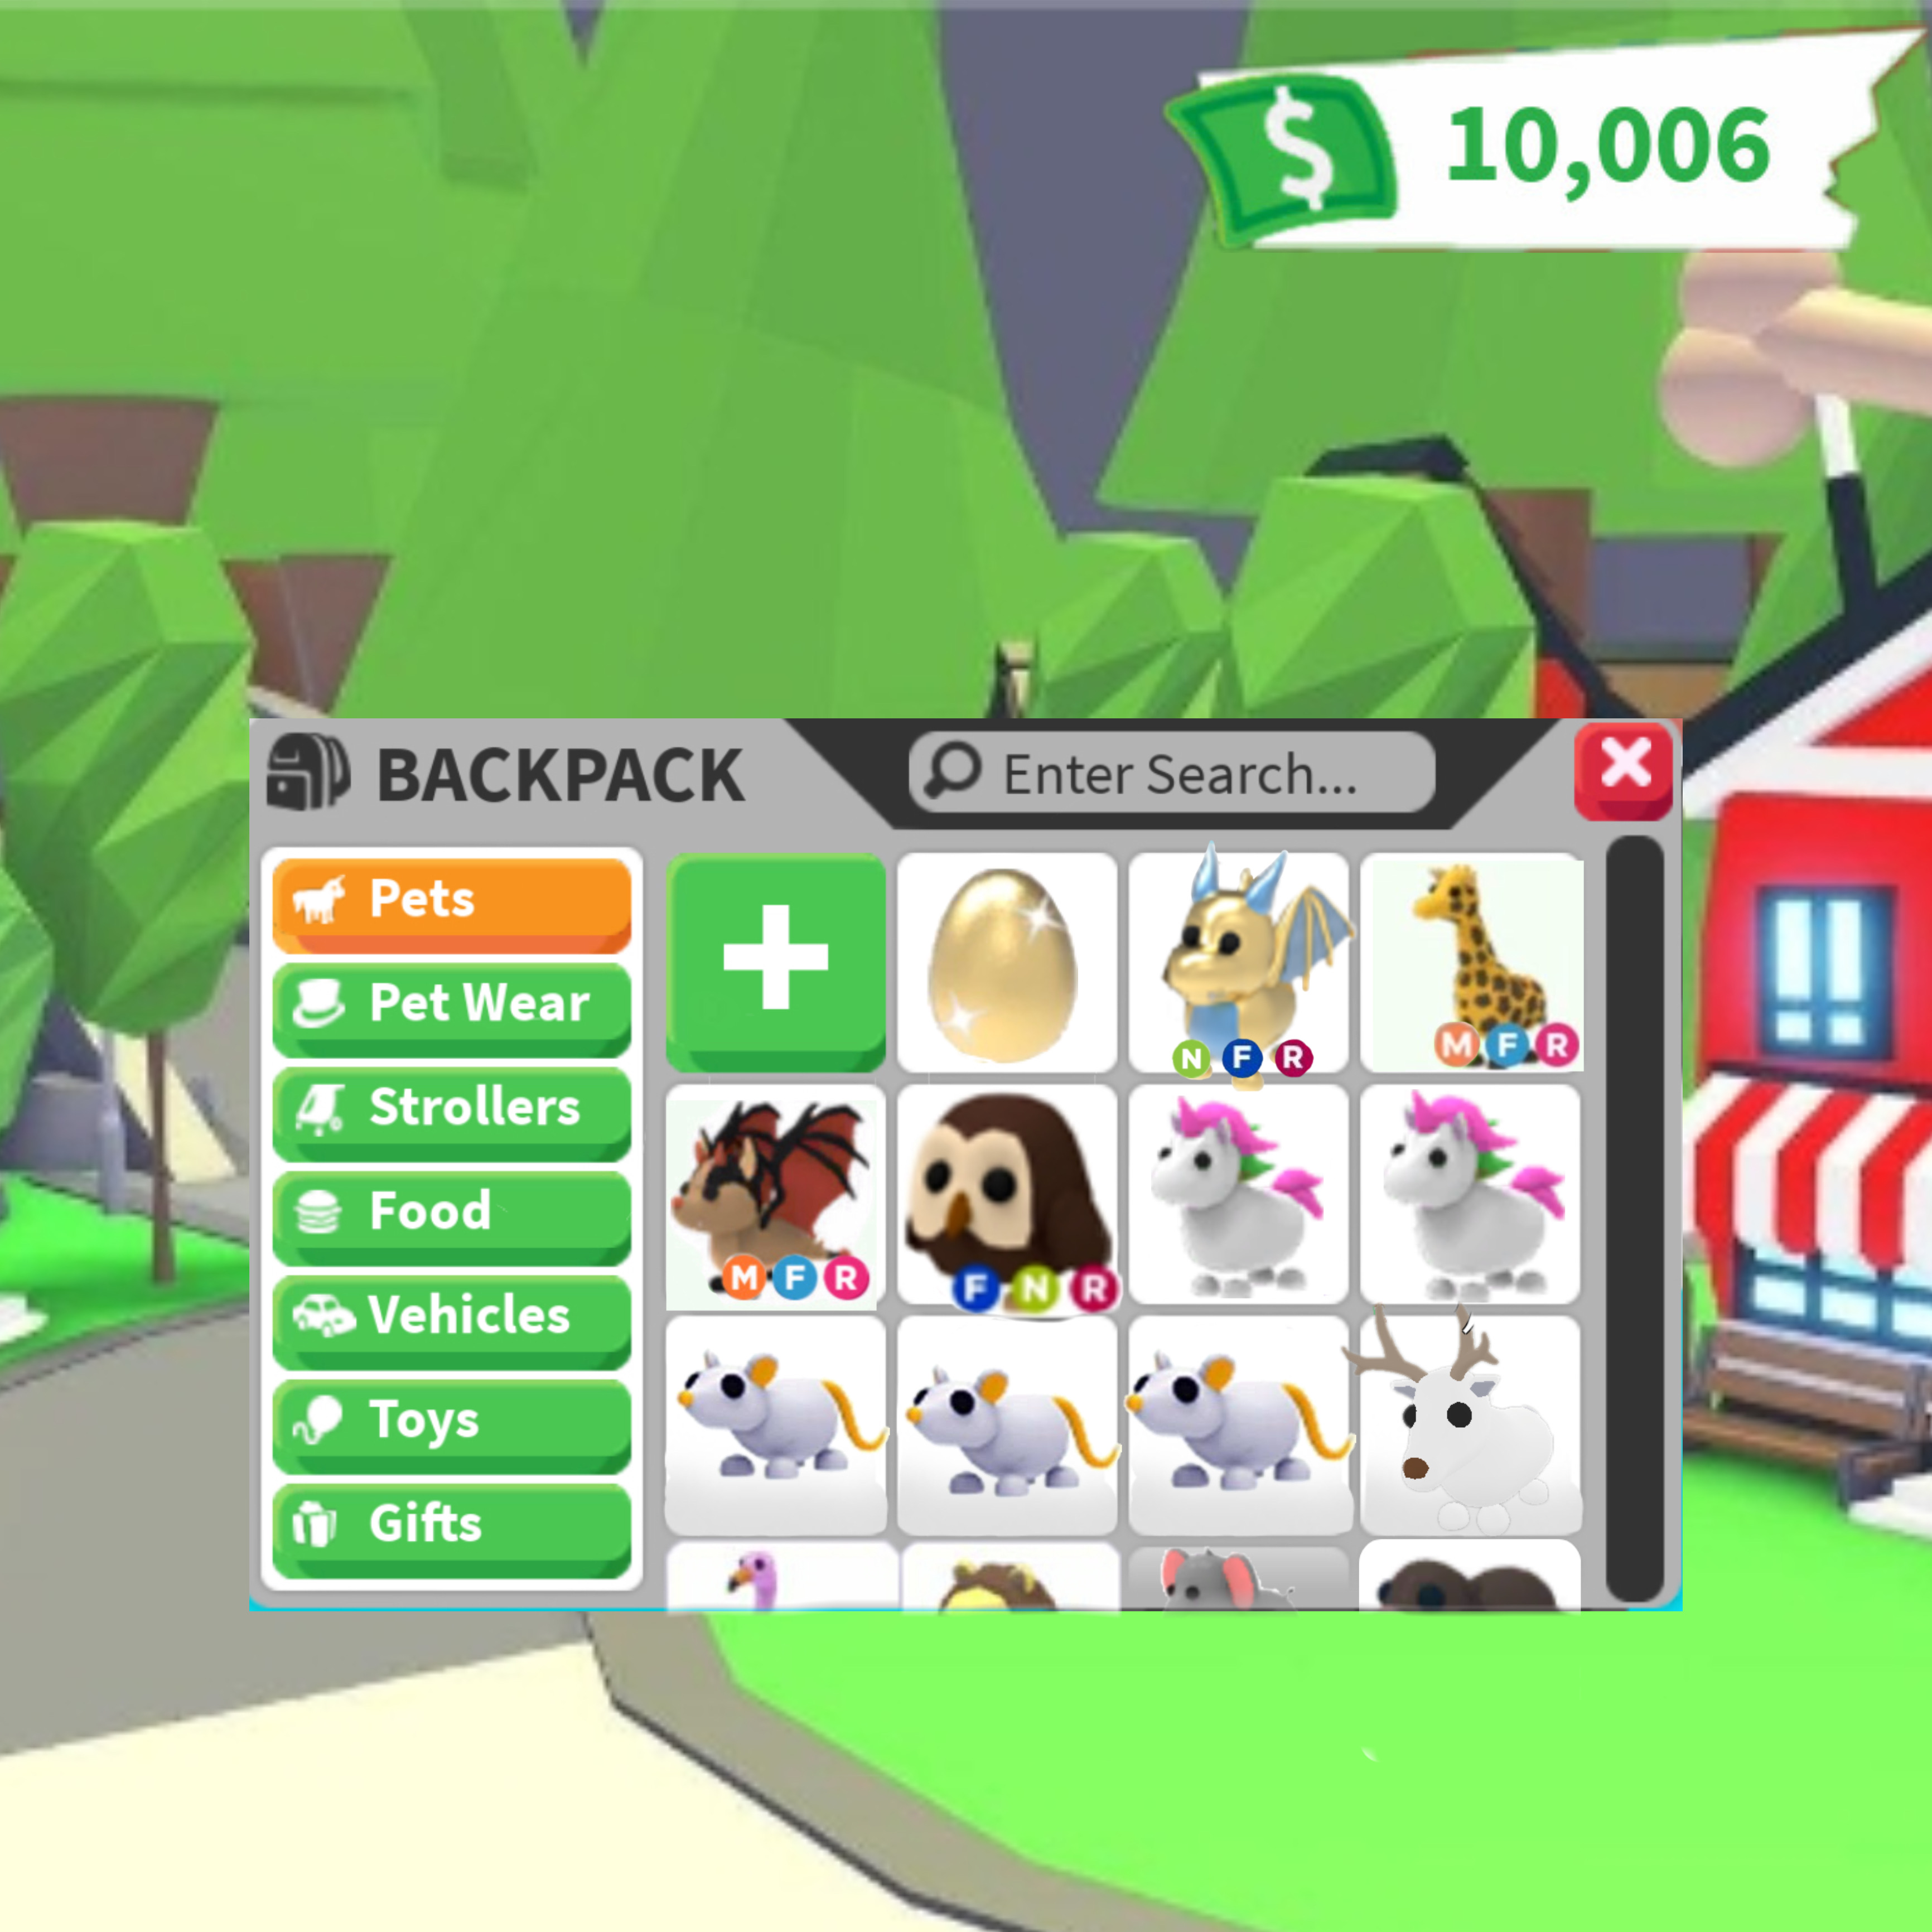 Adoptme Roblox Inventory Rich Flex Image By Mochachxps - roblox inventory search